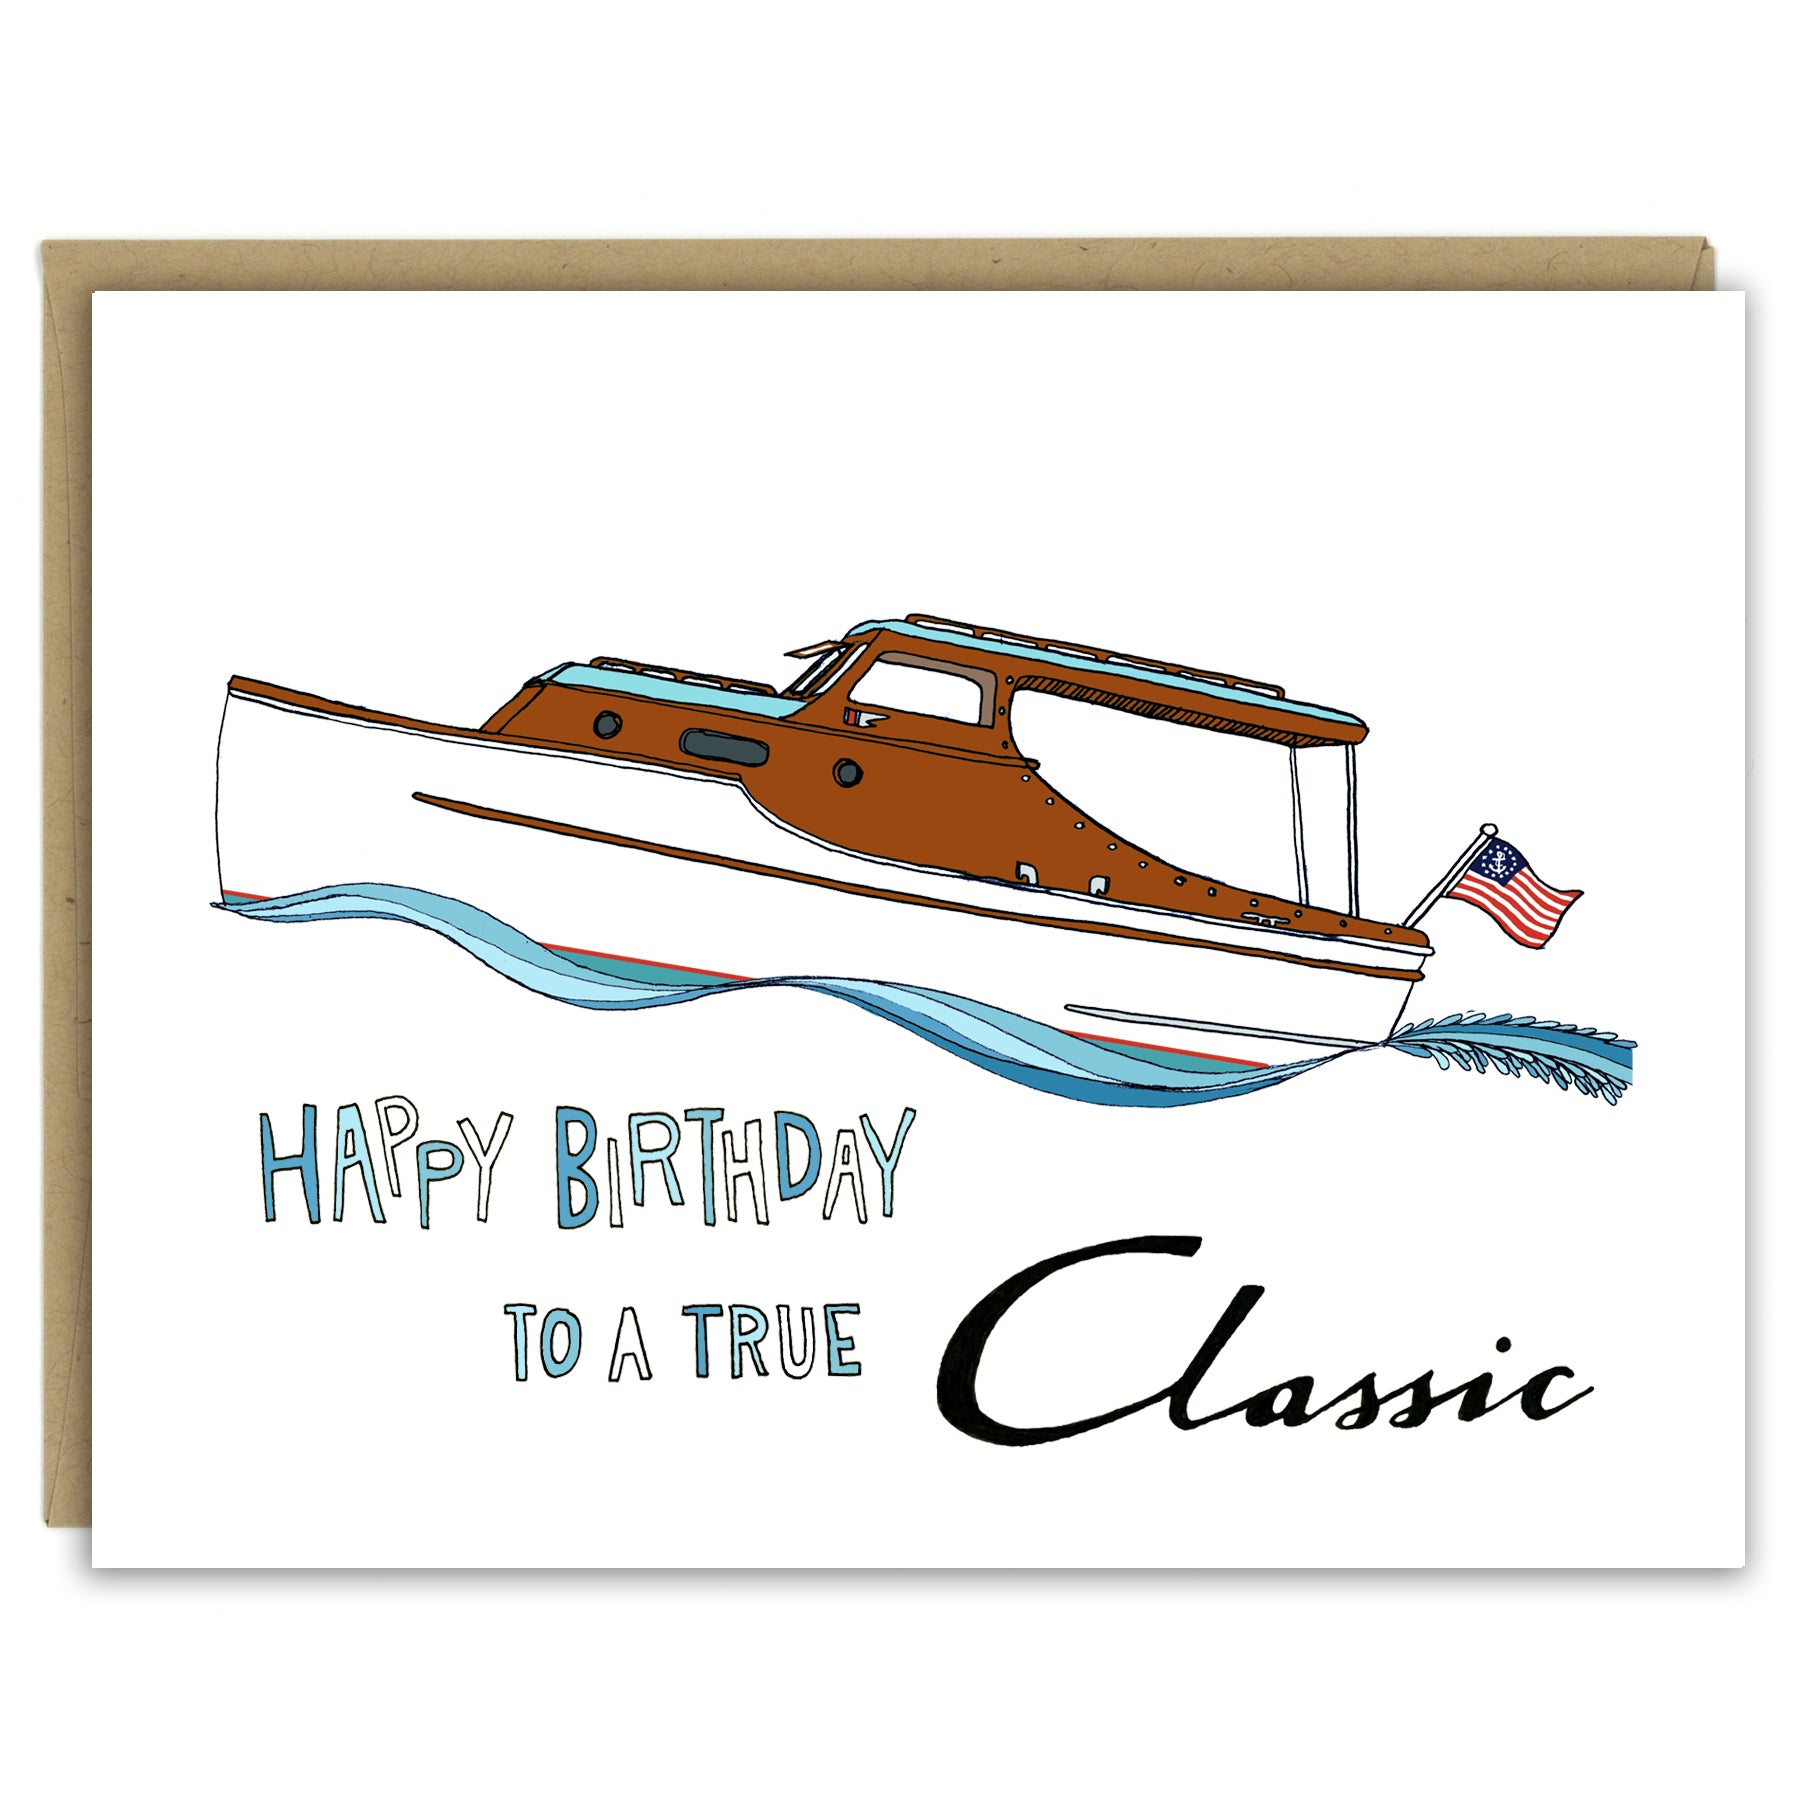 A greeting card with a hand-drawn illustration of a classic Christ Craft boat riding high in the waves with an American flag flying on the stern. A hand-lettered message reads, "Happy Birthday to a true Classic." Shown with a Kraft paper envelope on a white background. 